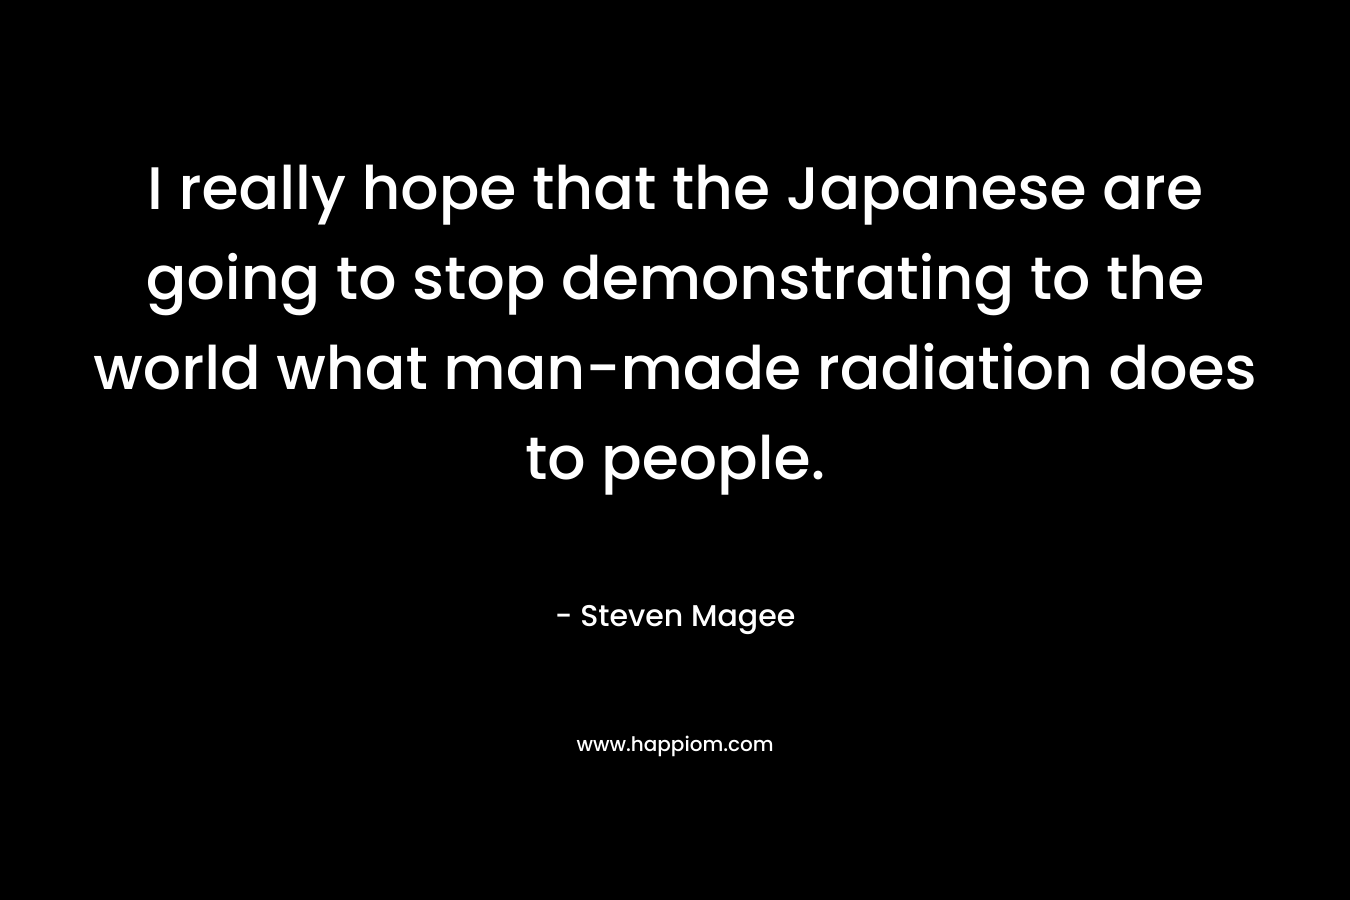 I really hope that the Japanese are going to stop demonstrating to the world what man-made radiation does to people.